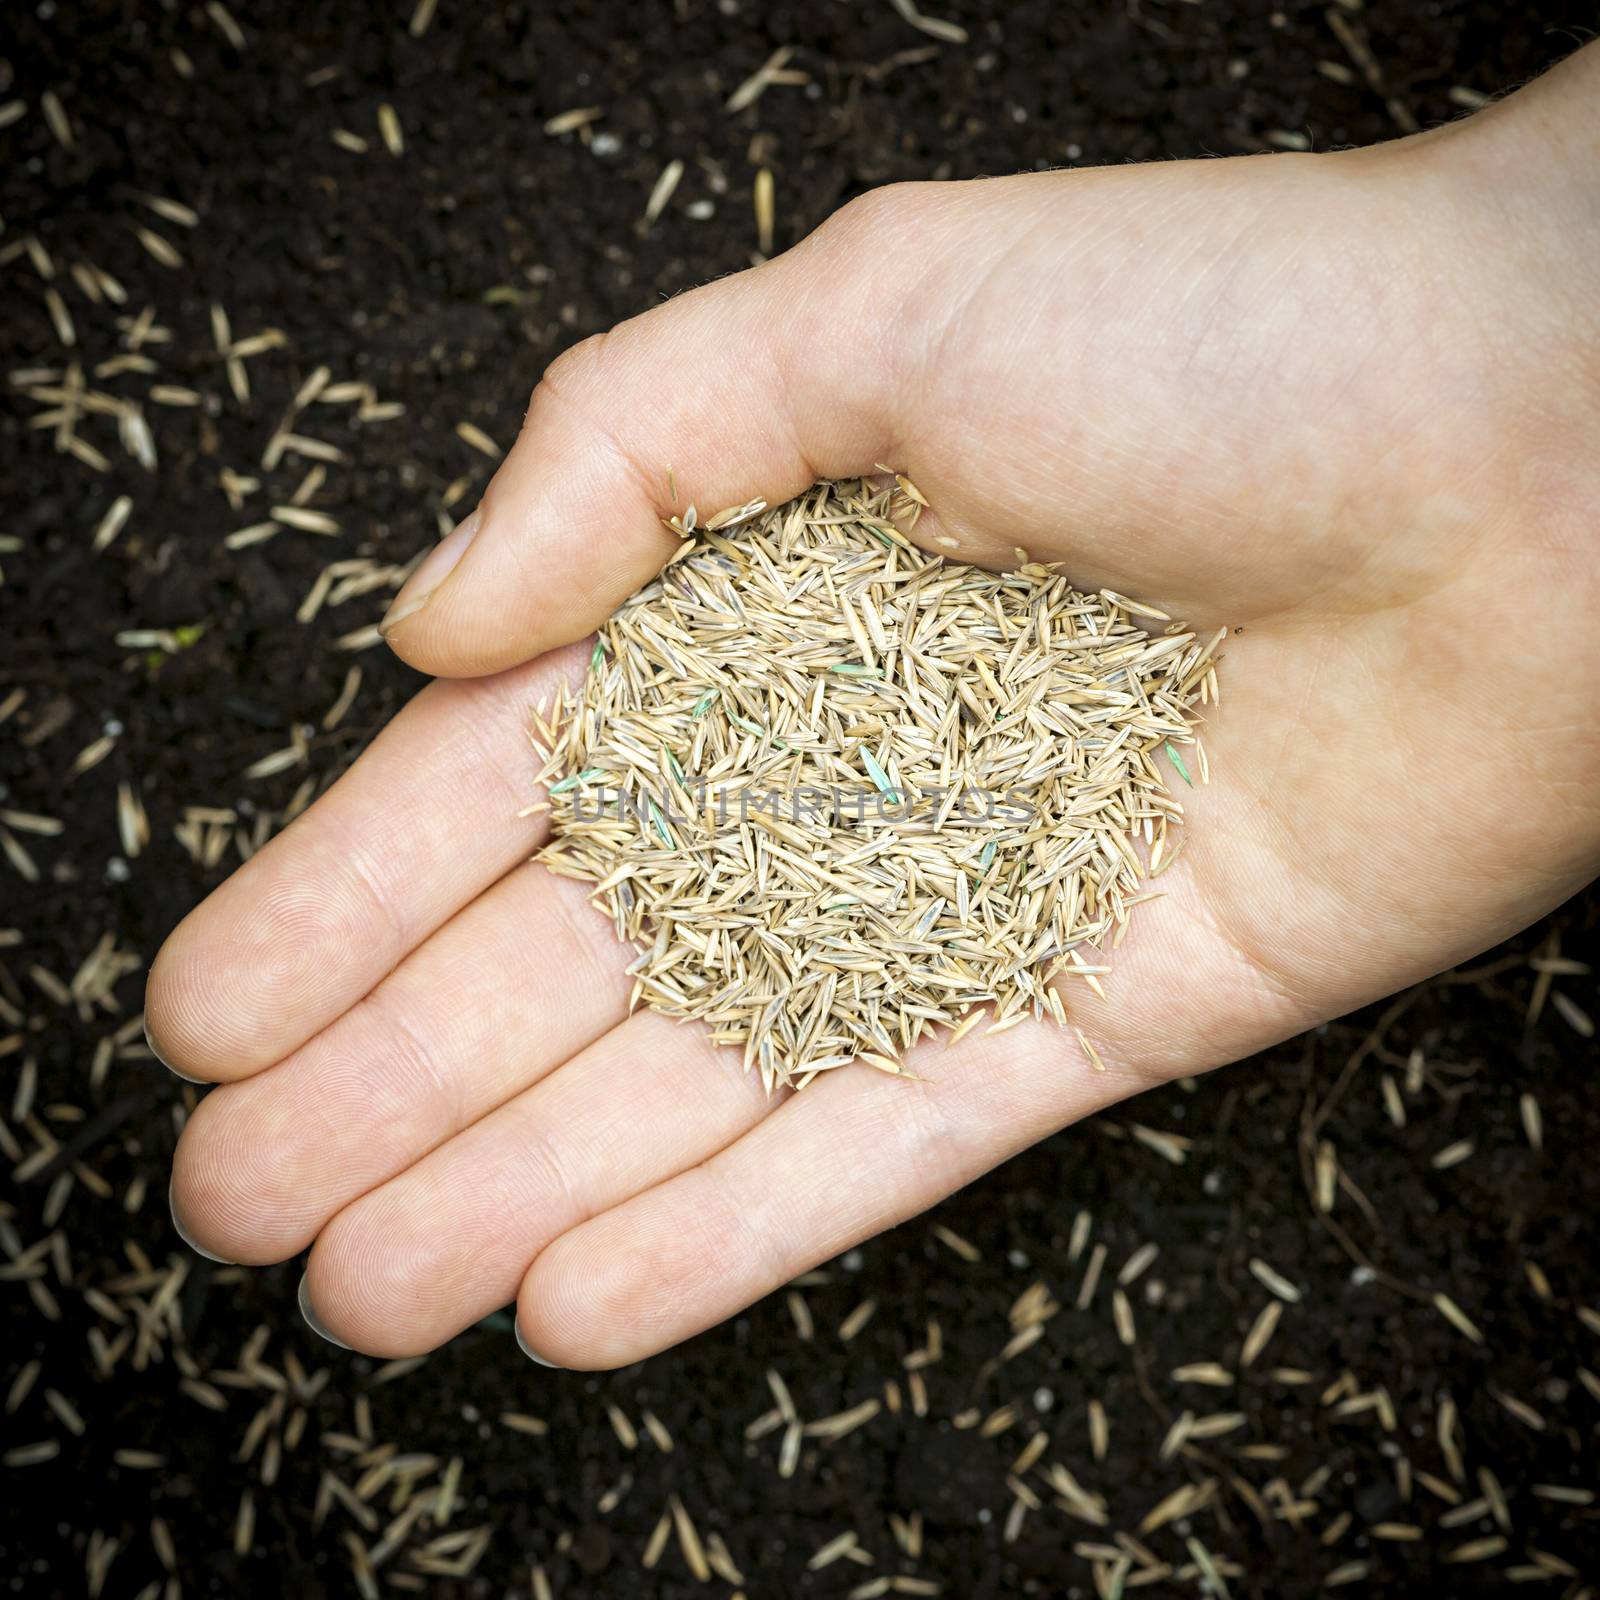 Grass seed held in hand over soil with planted seeds